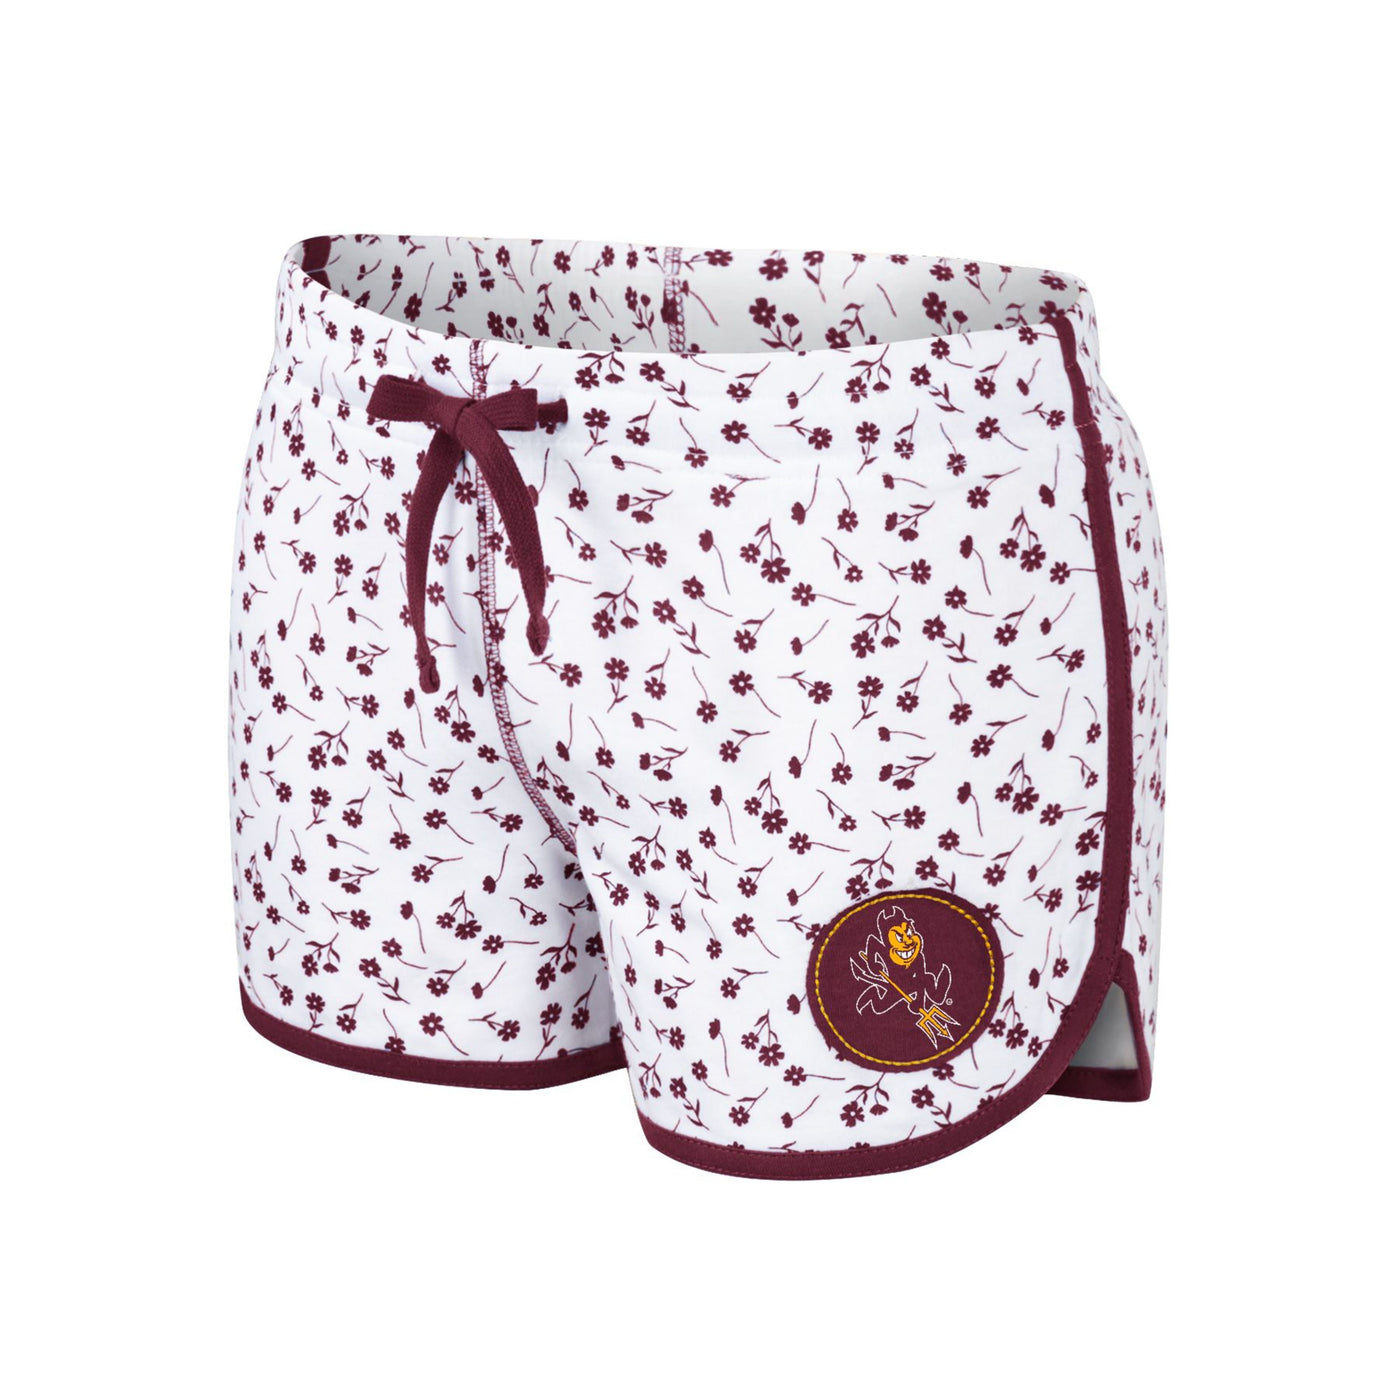 ASU white youth girls shorts covered in small maroon flowers. Maroon trim and drawstrings. A small sparky mascot on the bottom.